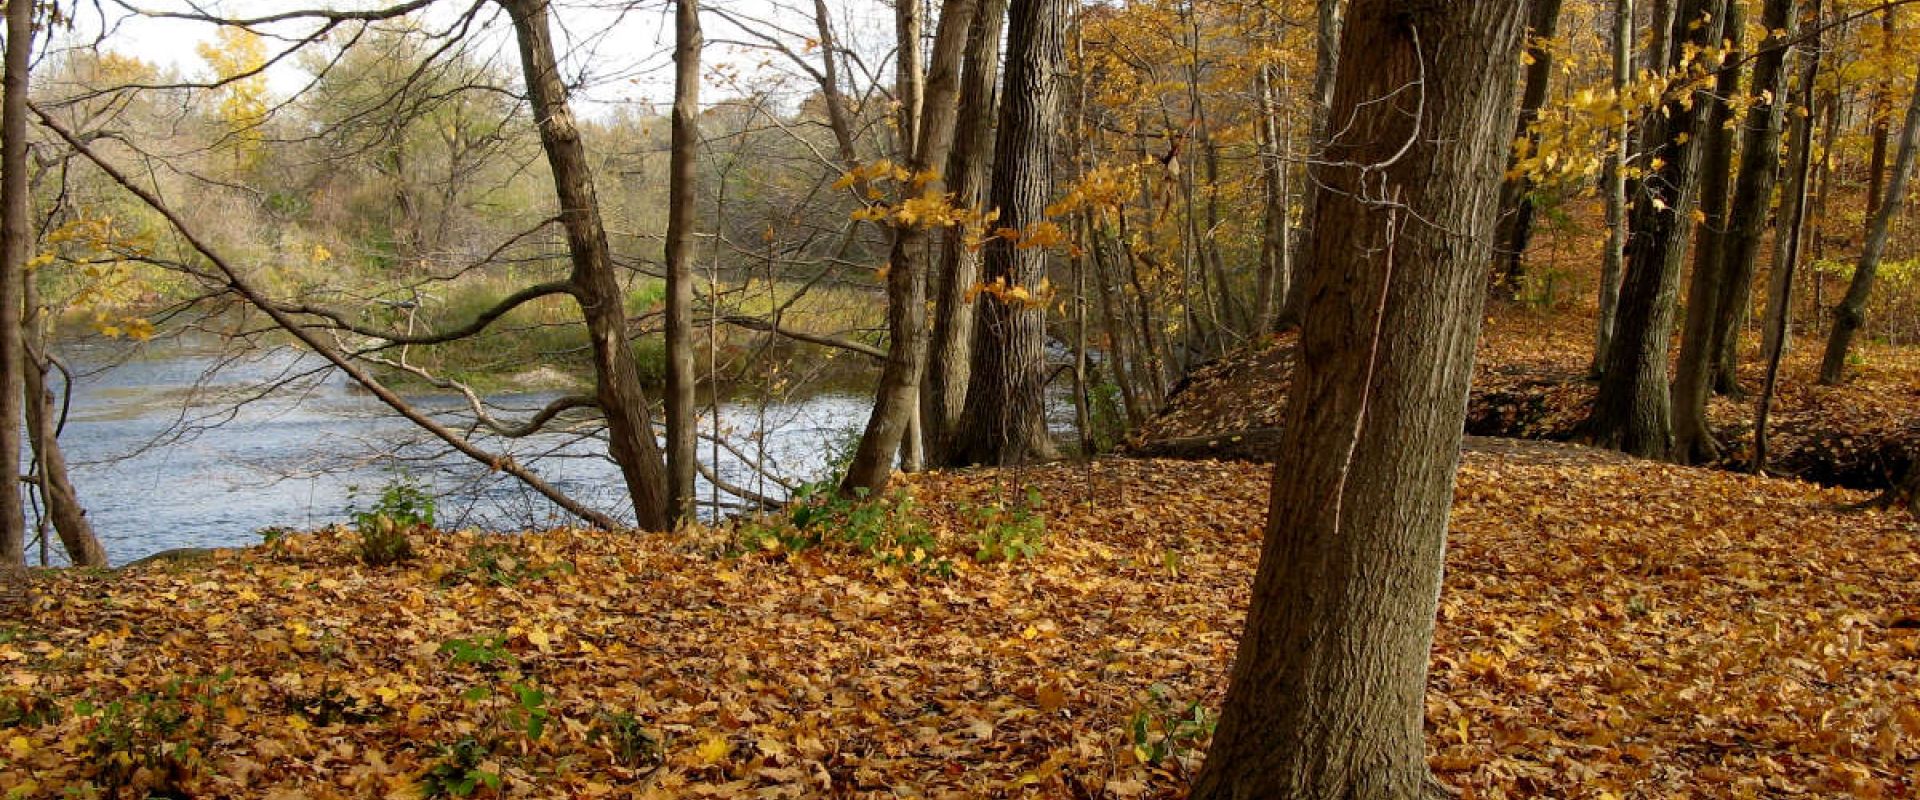 Golden leaves are scattered on the ground of the Meadowlily Woods in the fall. The Thames River can be seen in the background.